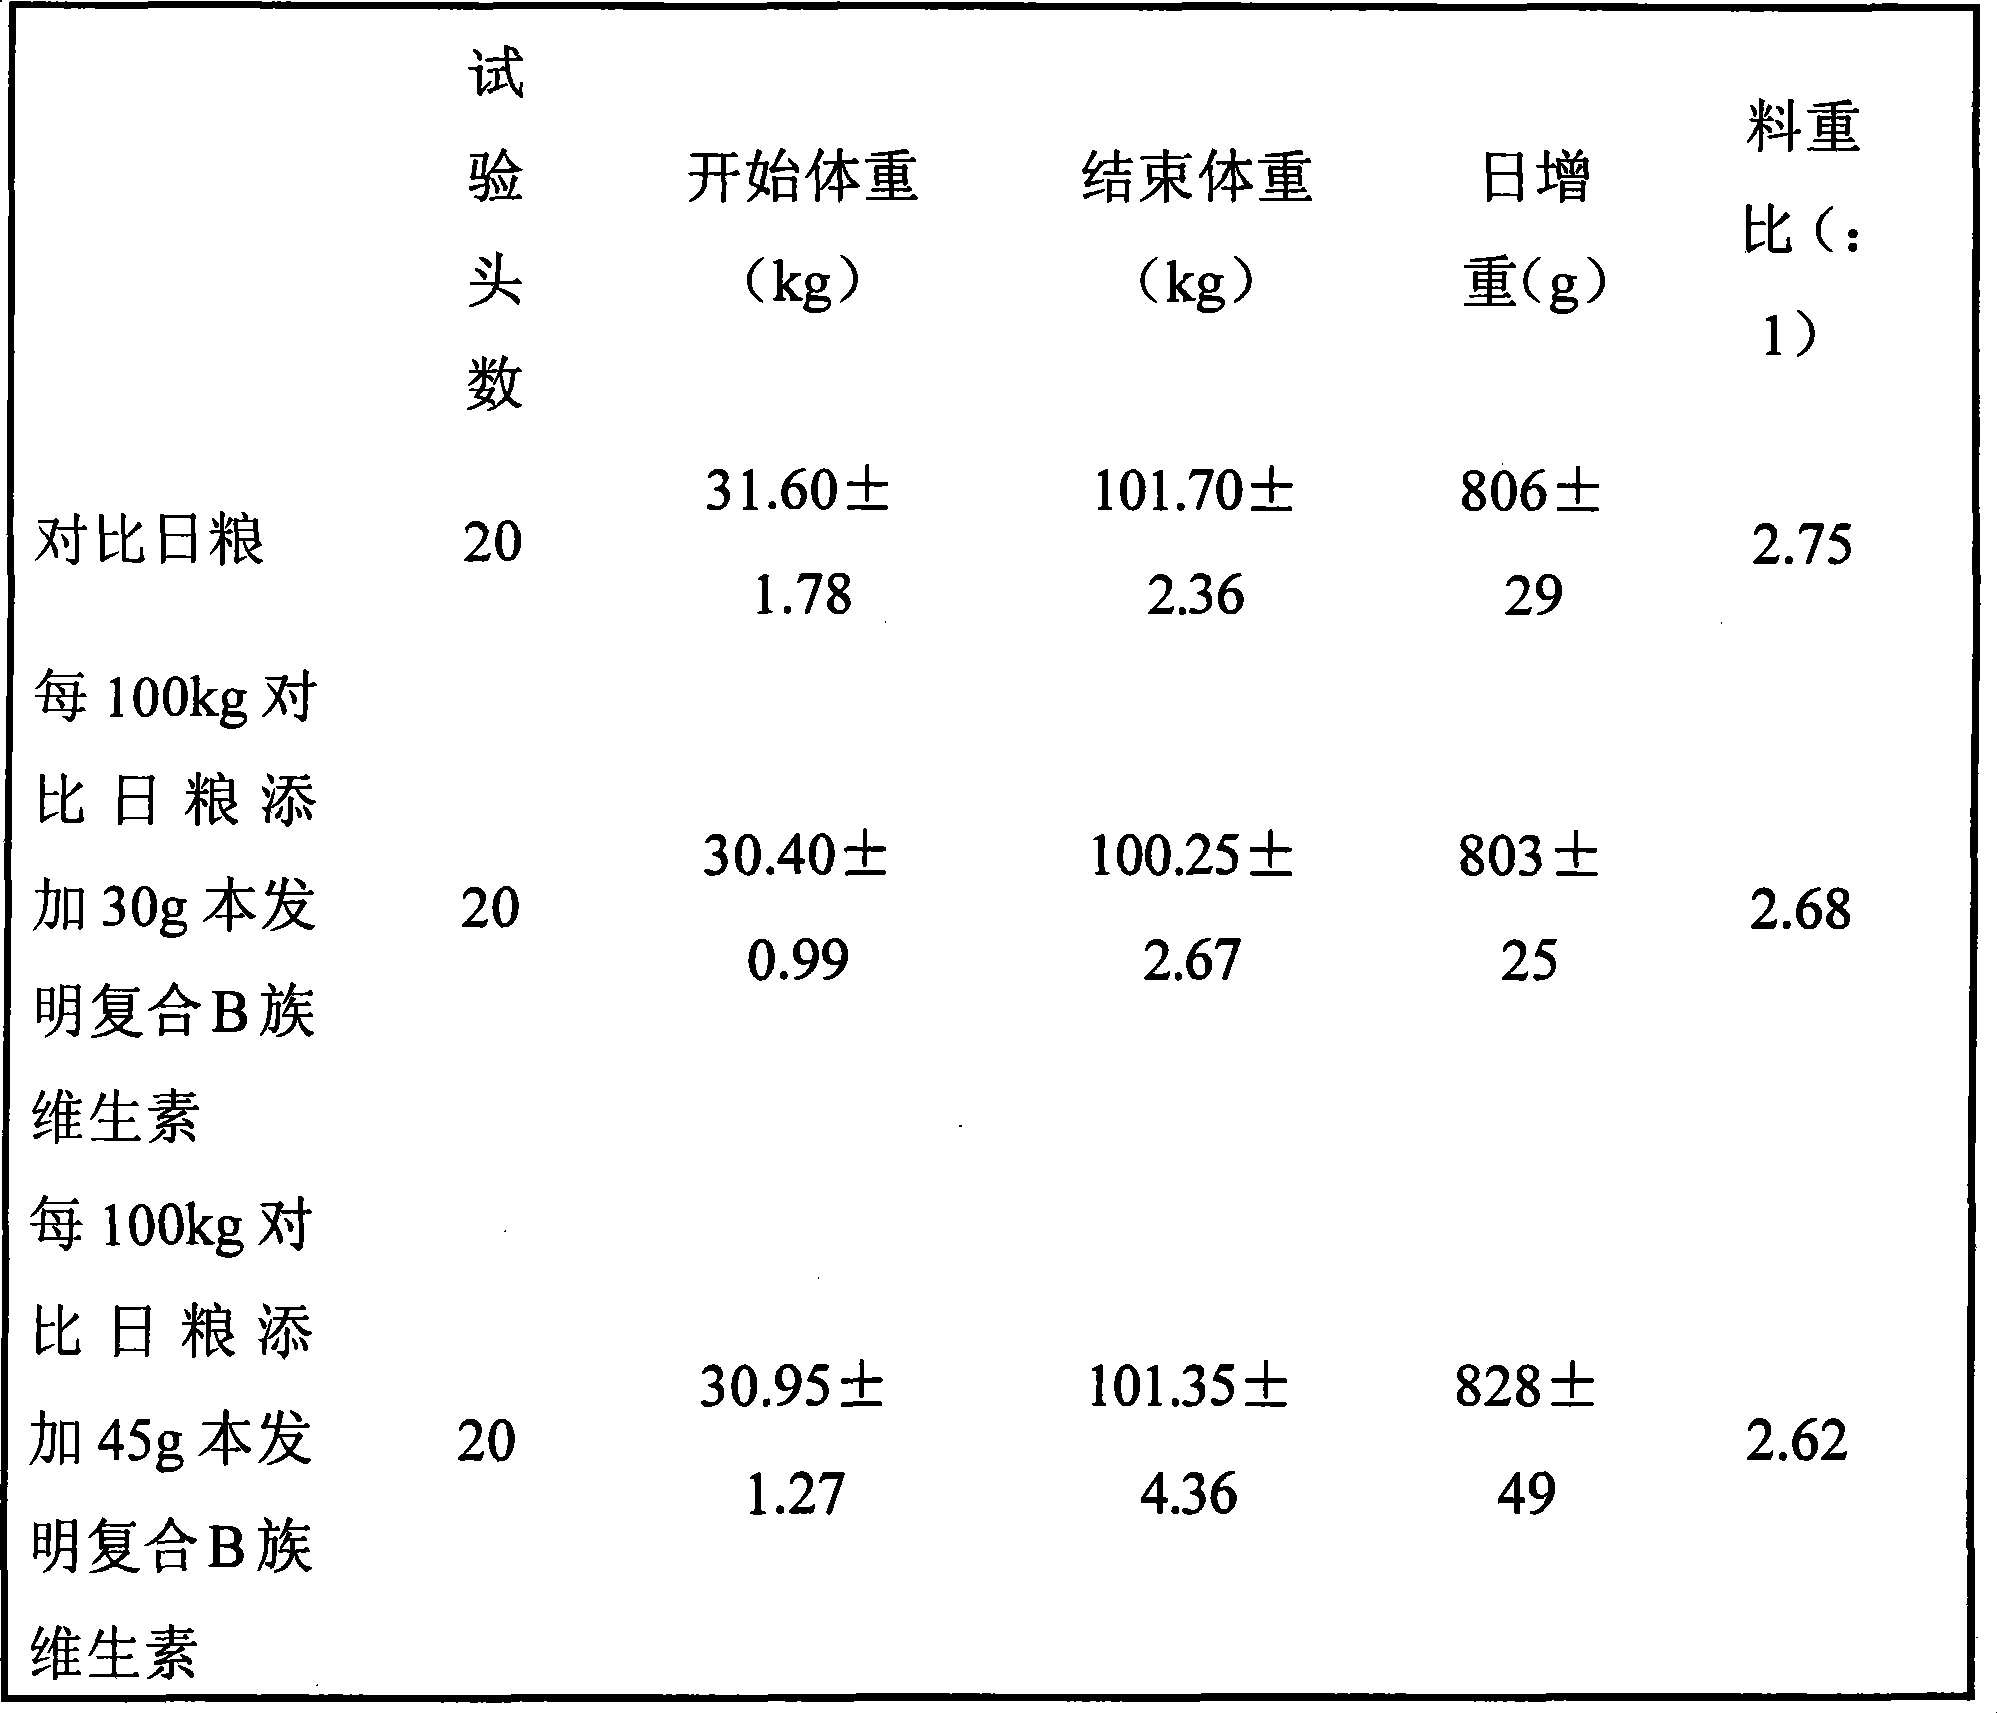 Composite B vitamin feedstuff additive for growing and fattening stage of pig